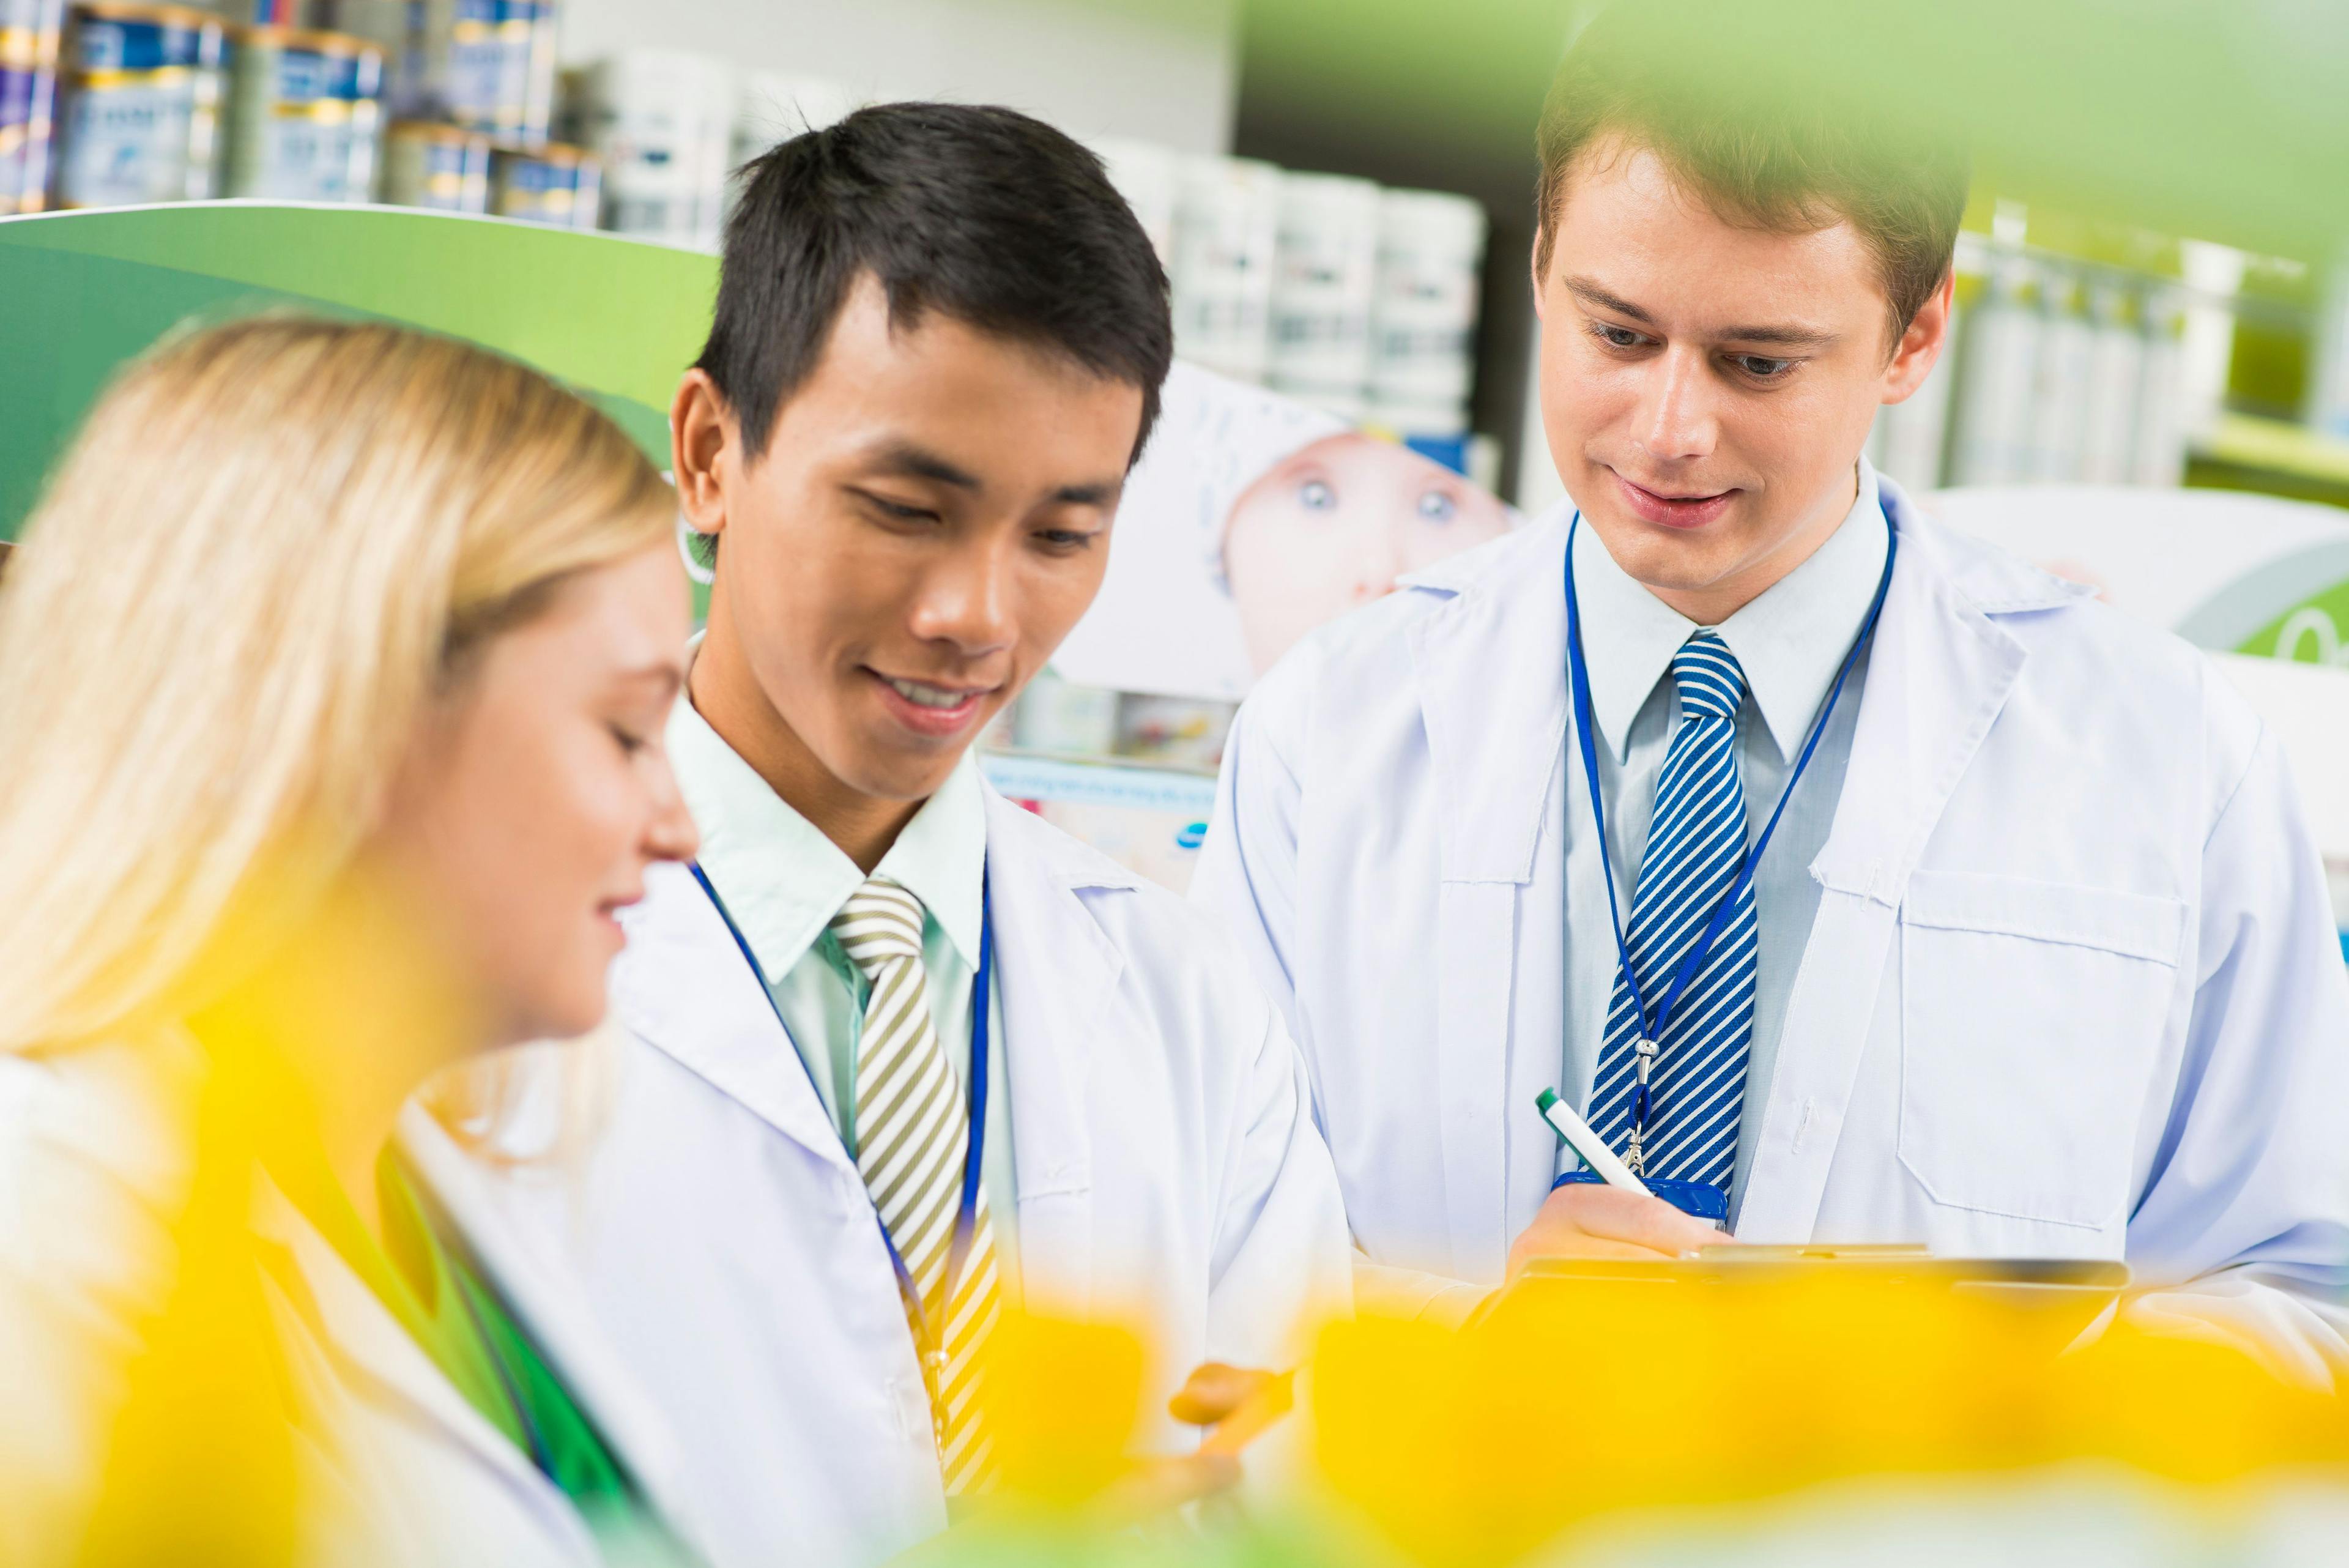 Fellowship Program Aims to Connect Community Pharmacists, Explore Opportunities